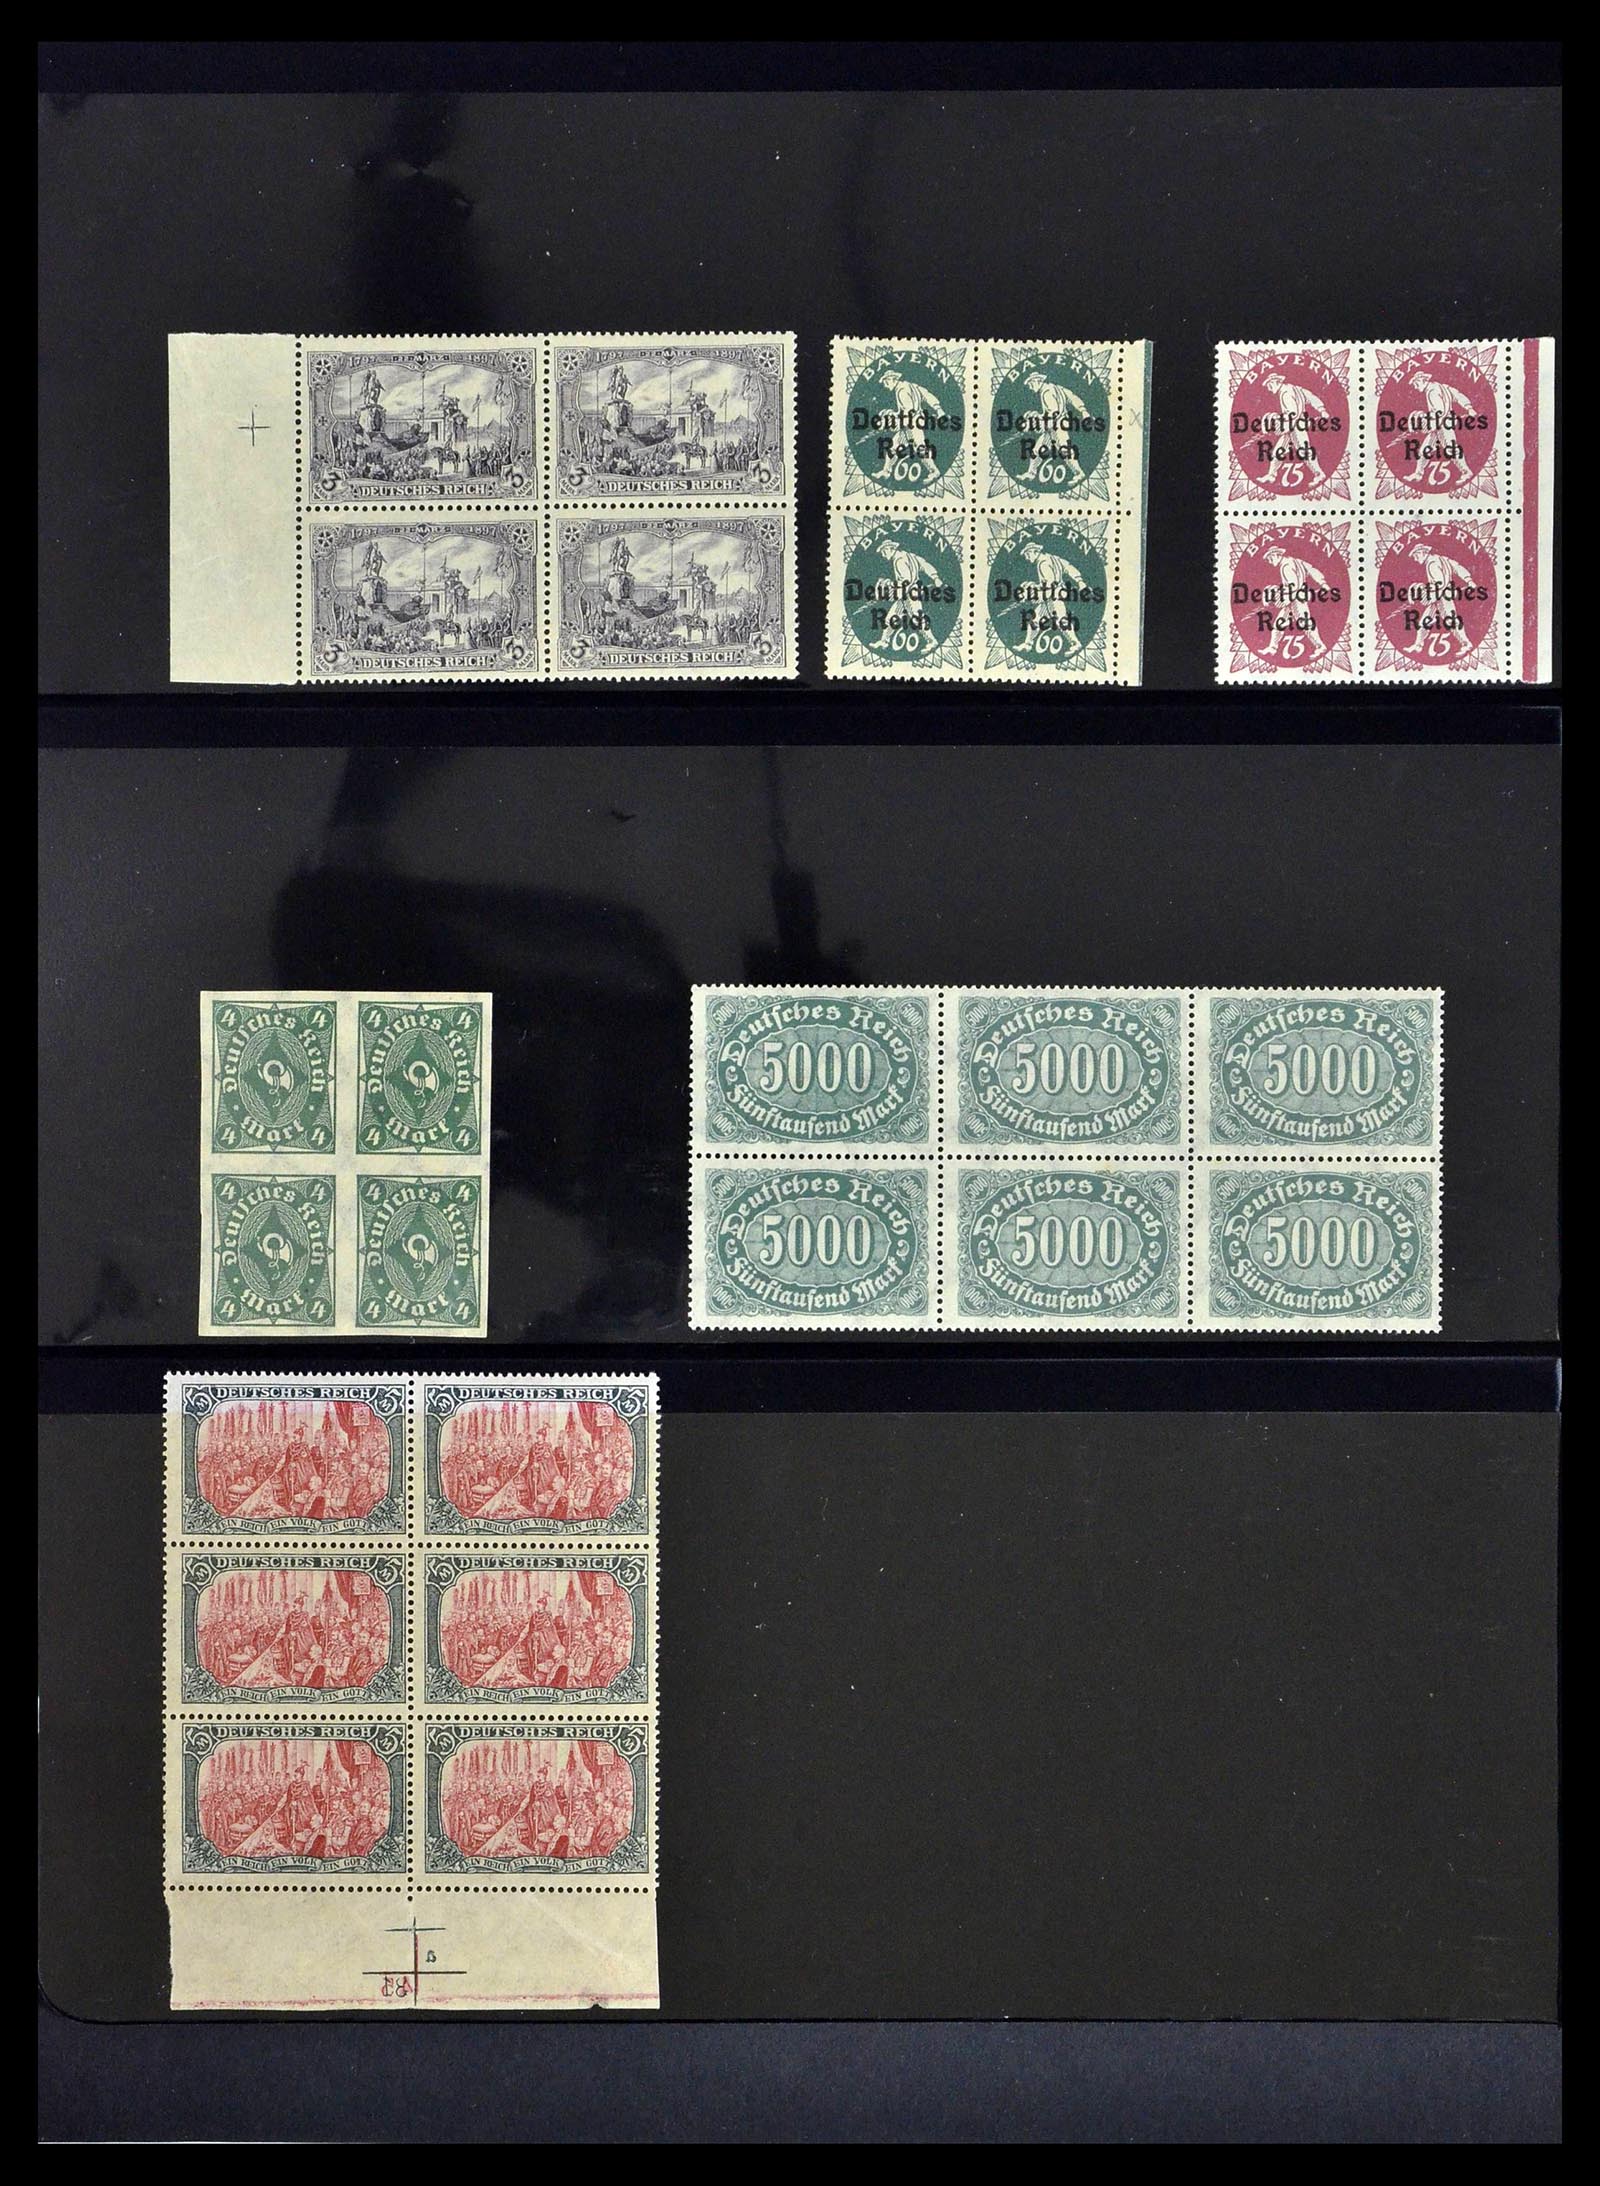 39255 0036 - Stamp collection 39255 German Reich MNH blocks of 4.